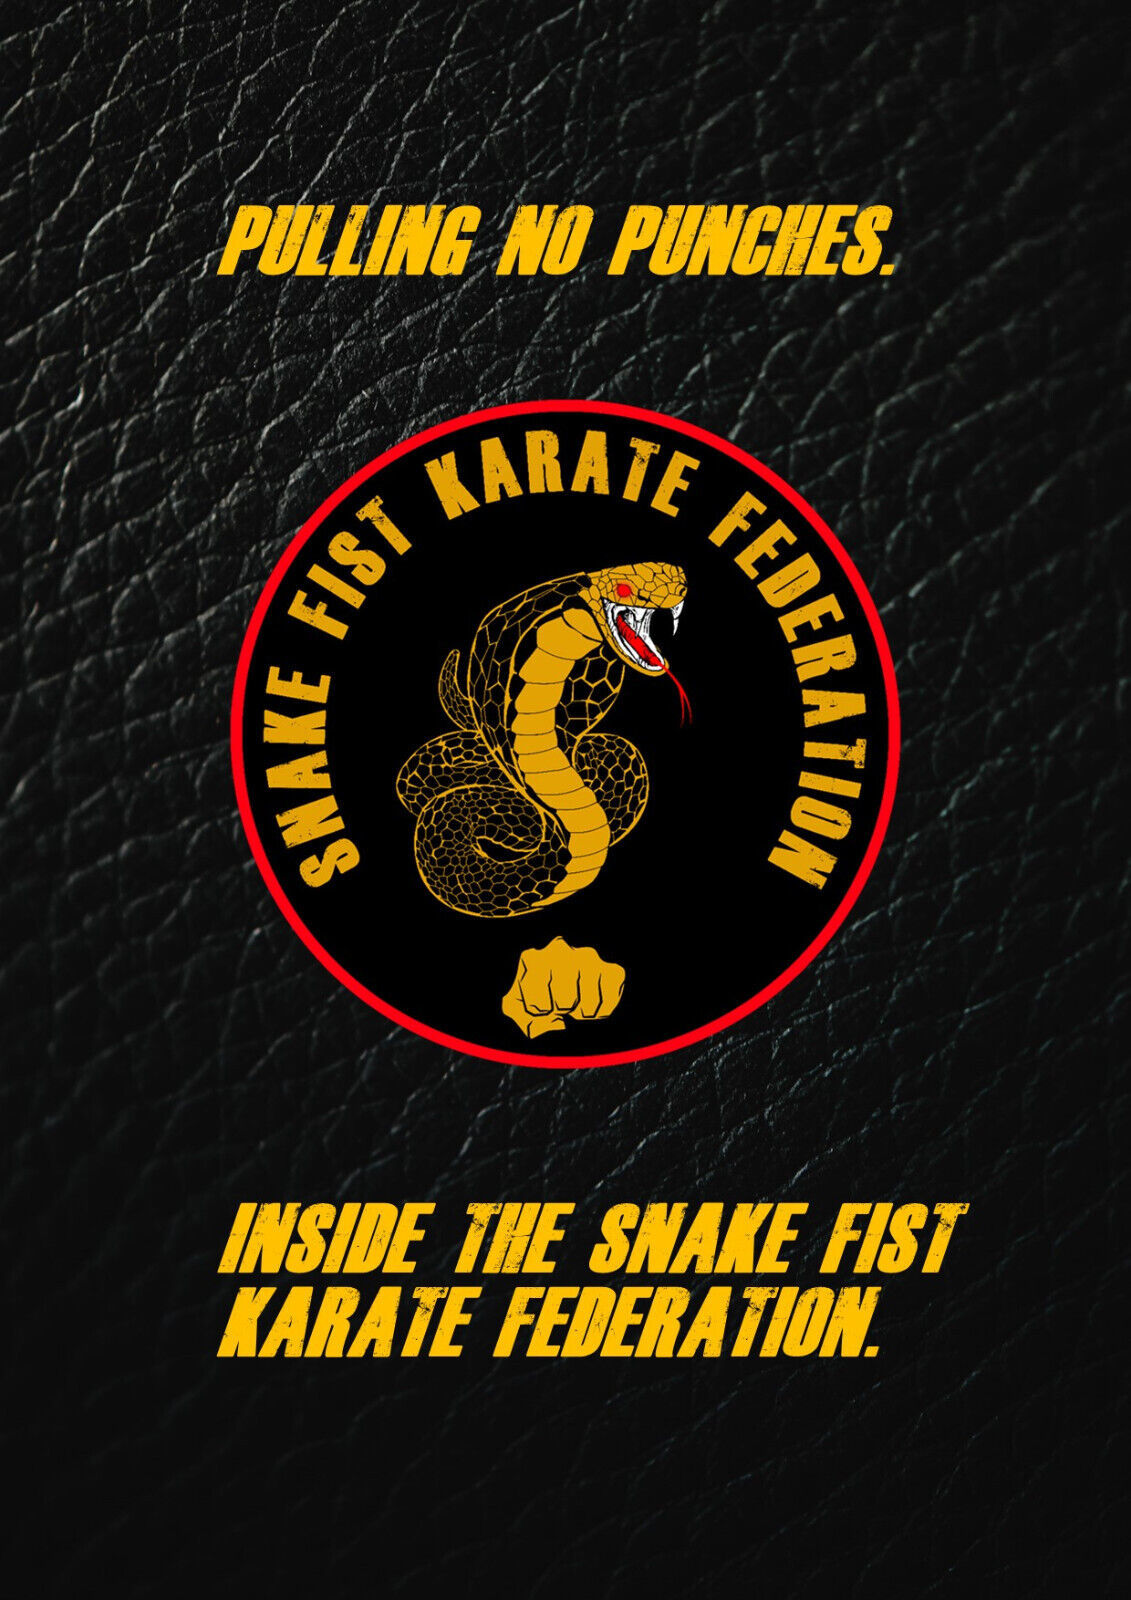 Primary image for PULLING NO PUNCHES:INSIDE THE SNAKE FIST KARATE FEDERATION.THE SECOND SFKF BOOK.